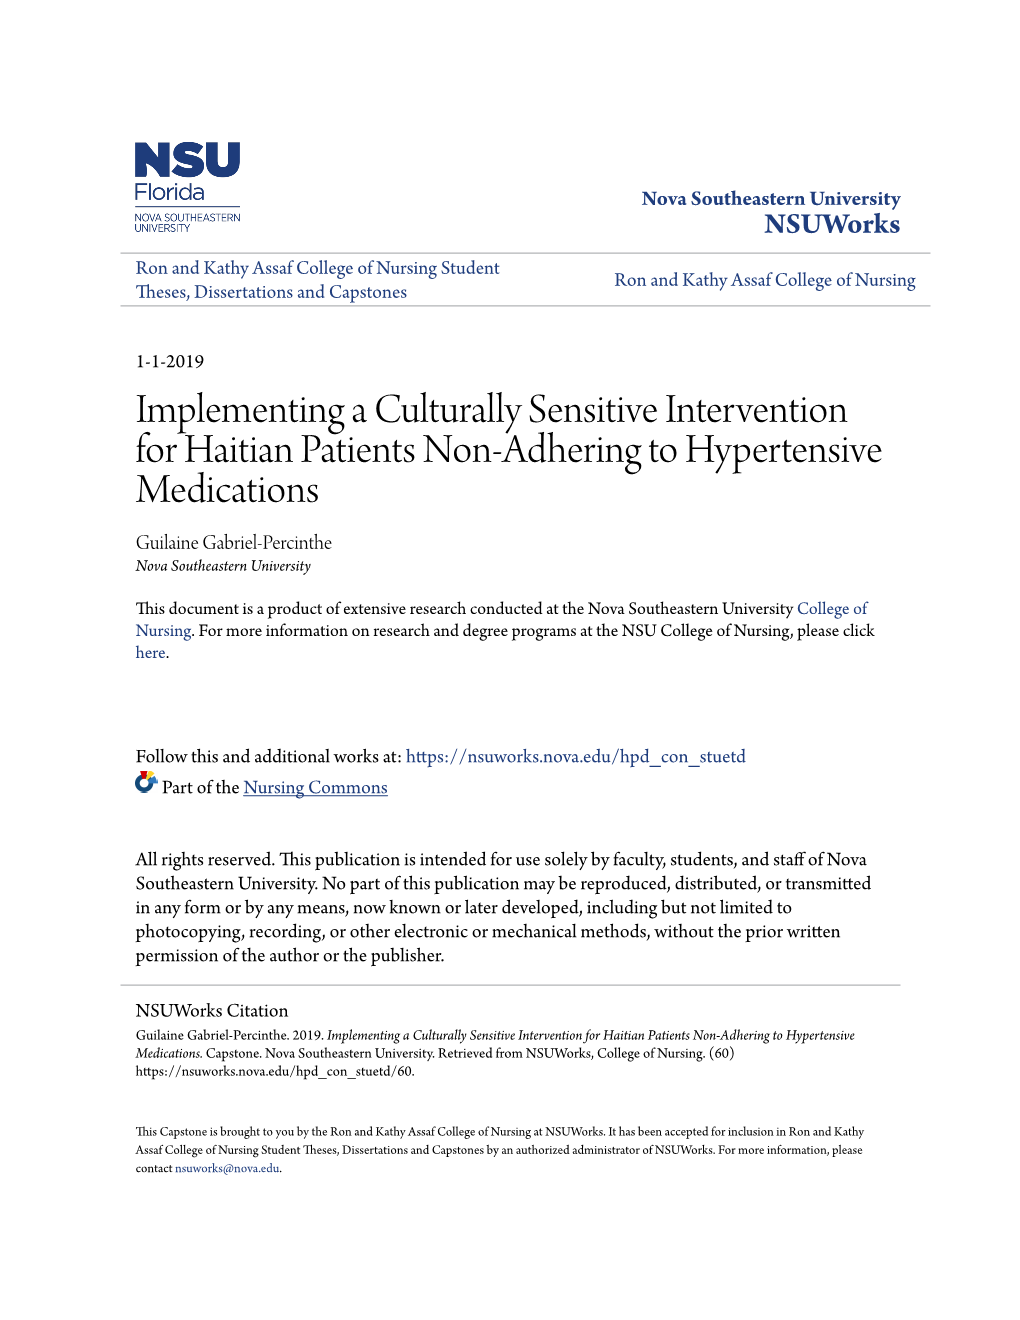 Implementing a Culturally Sensitive Intervention for Haitian Patients Non-Adhering to Hypertensive Medications Guilaine Gabriel-Percinthe Nova Southeastern University